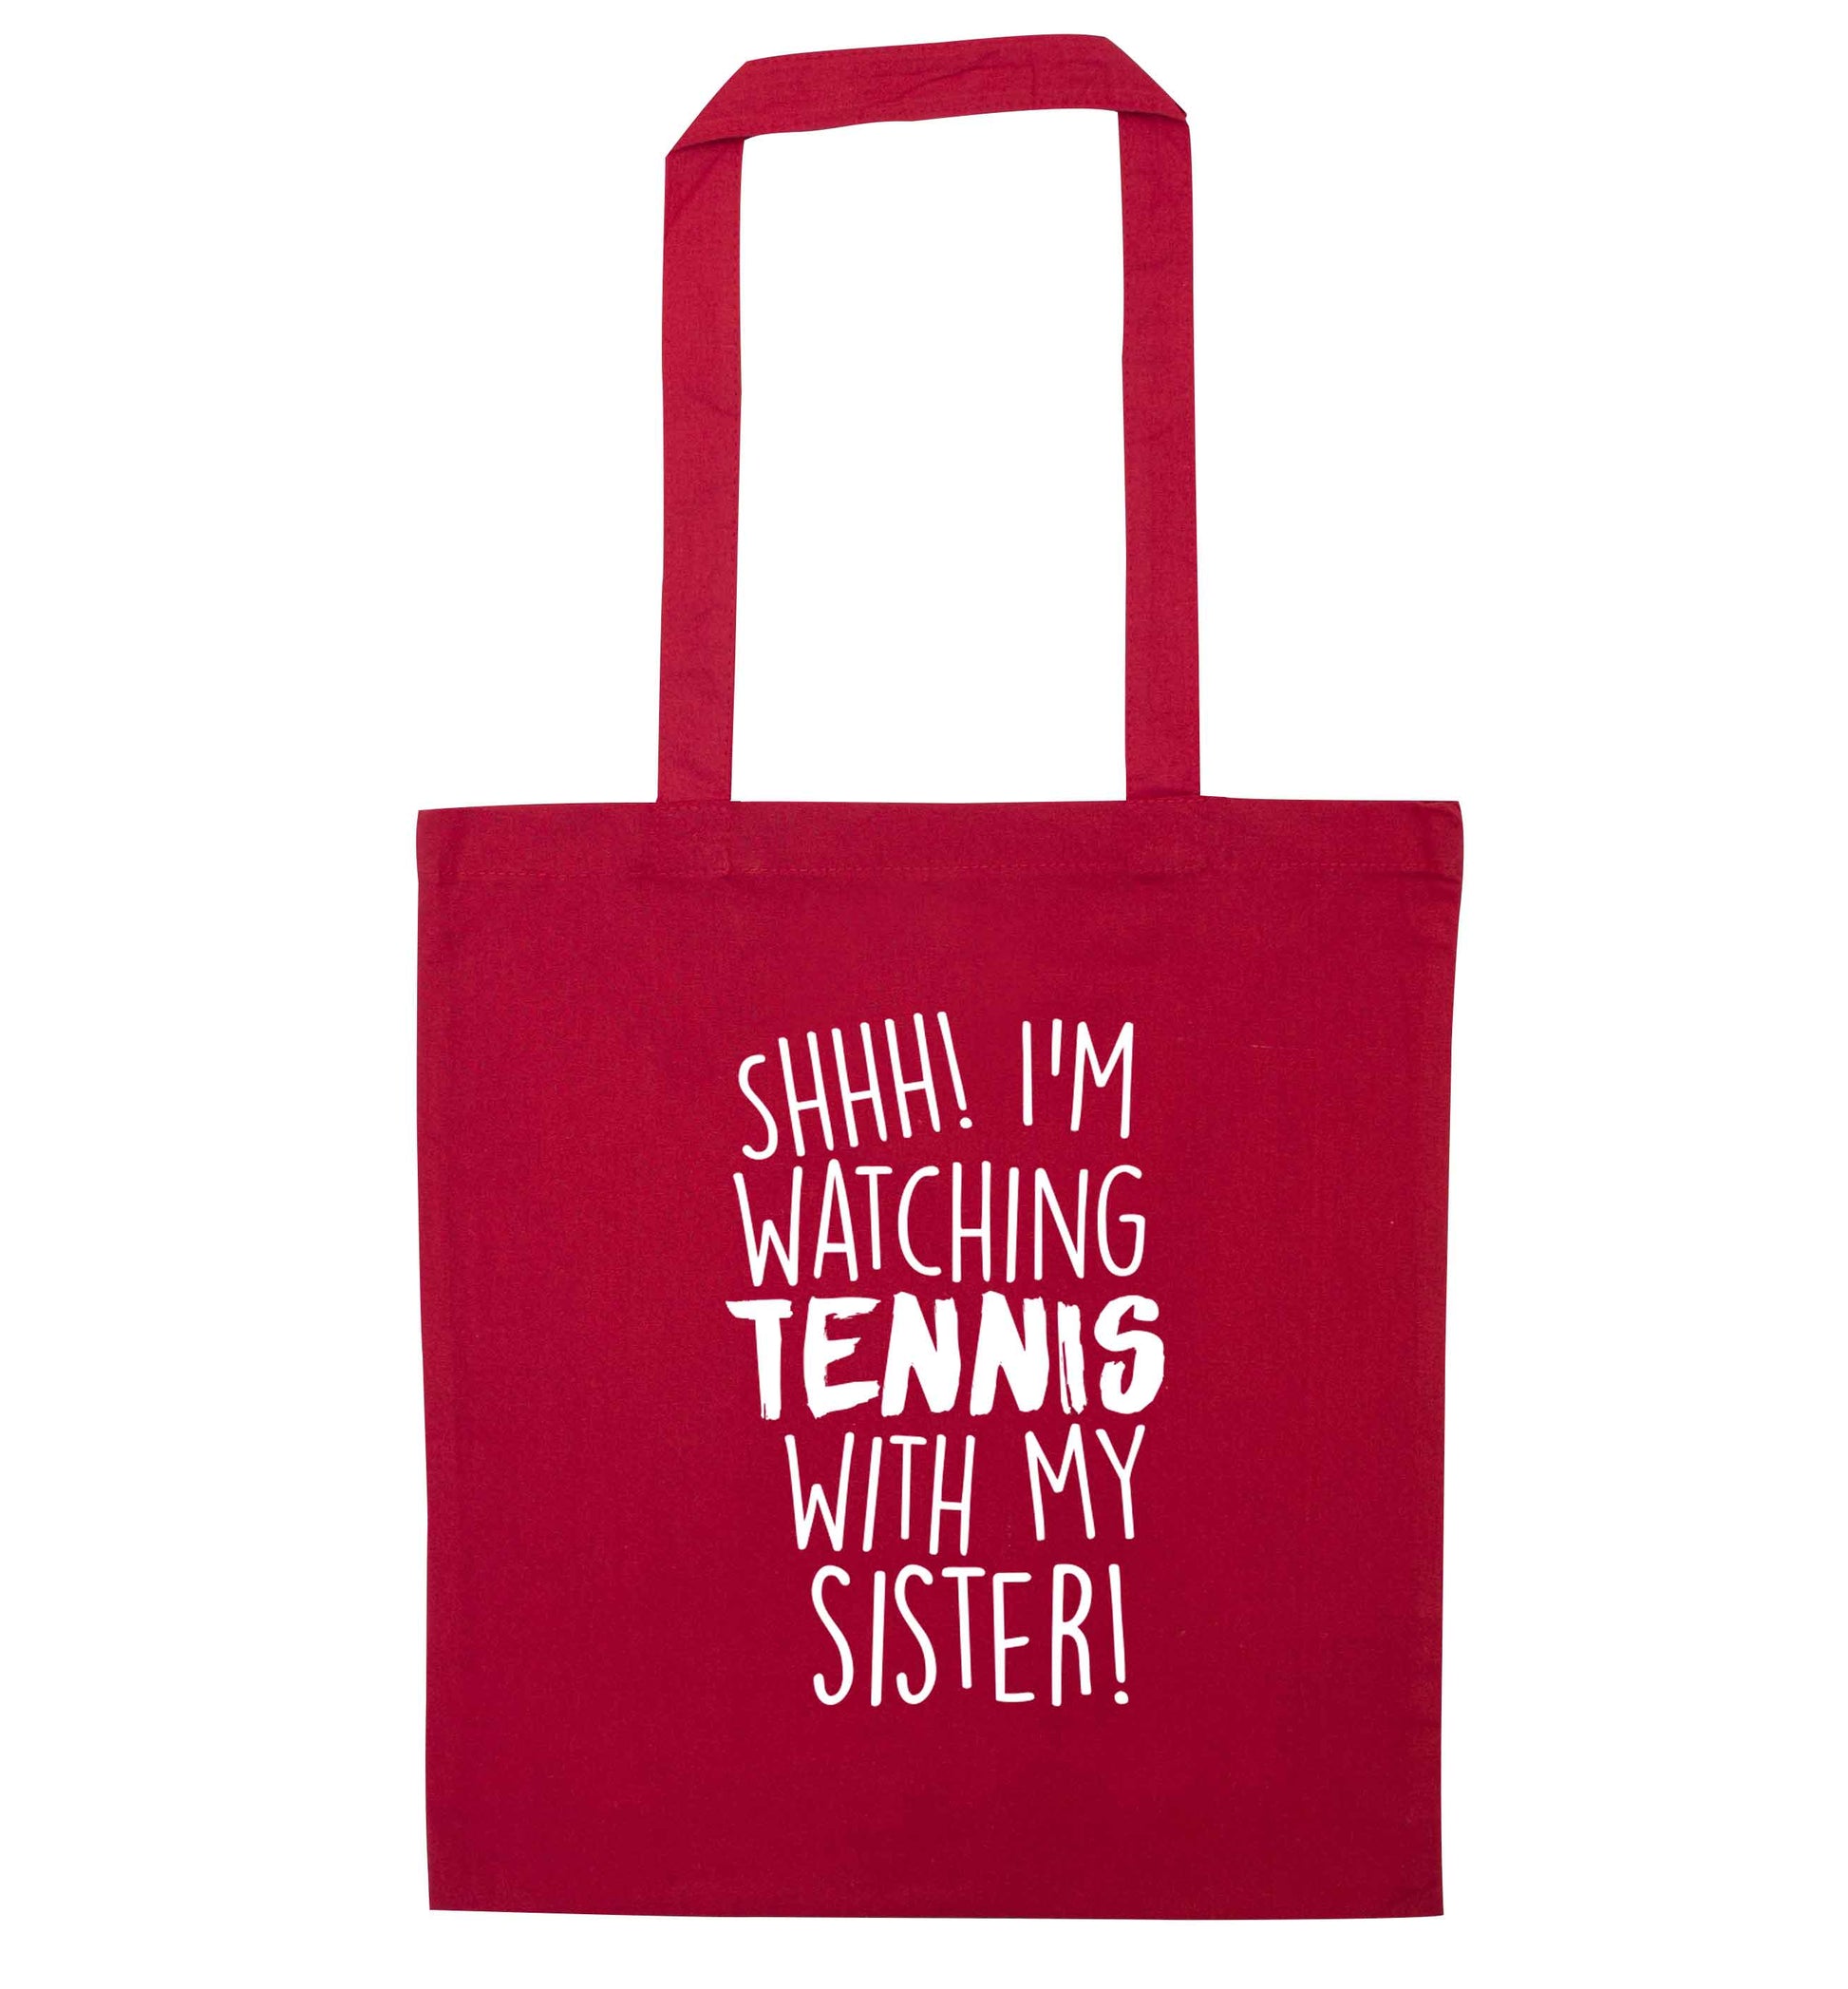 Shh! I'm watching tennis with my sister! red tote bag